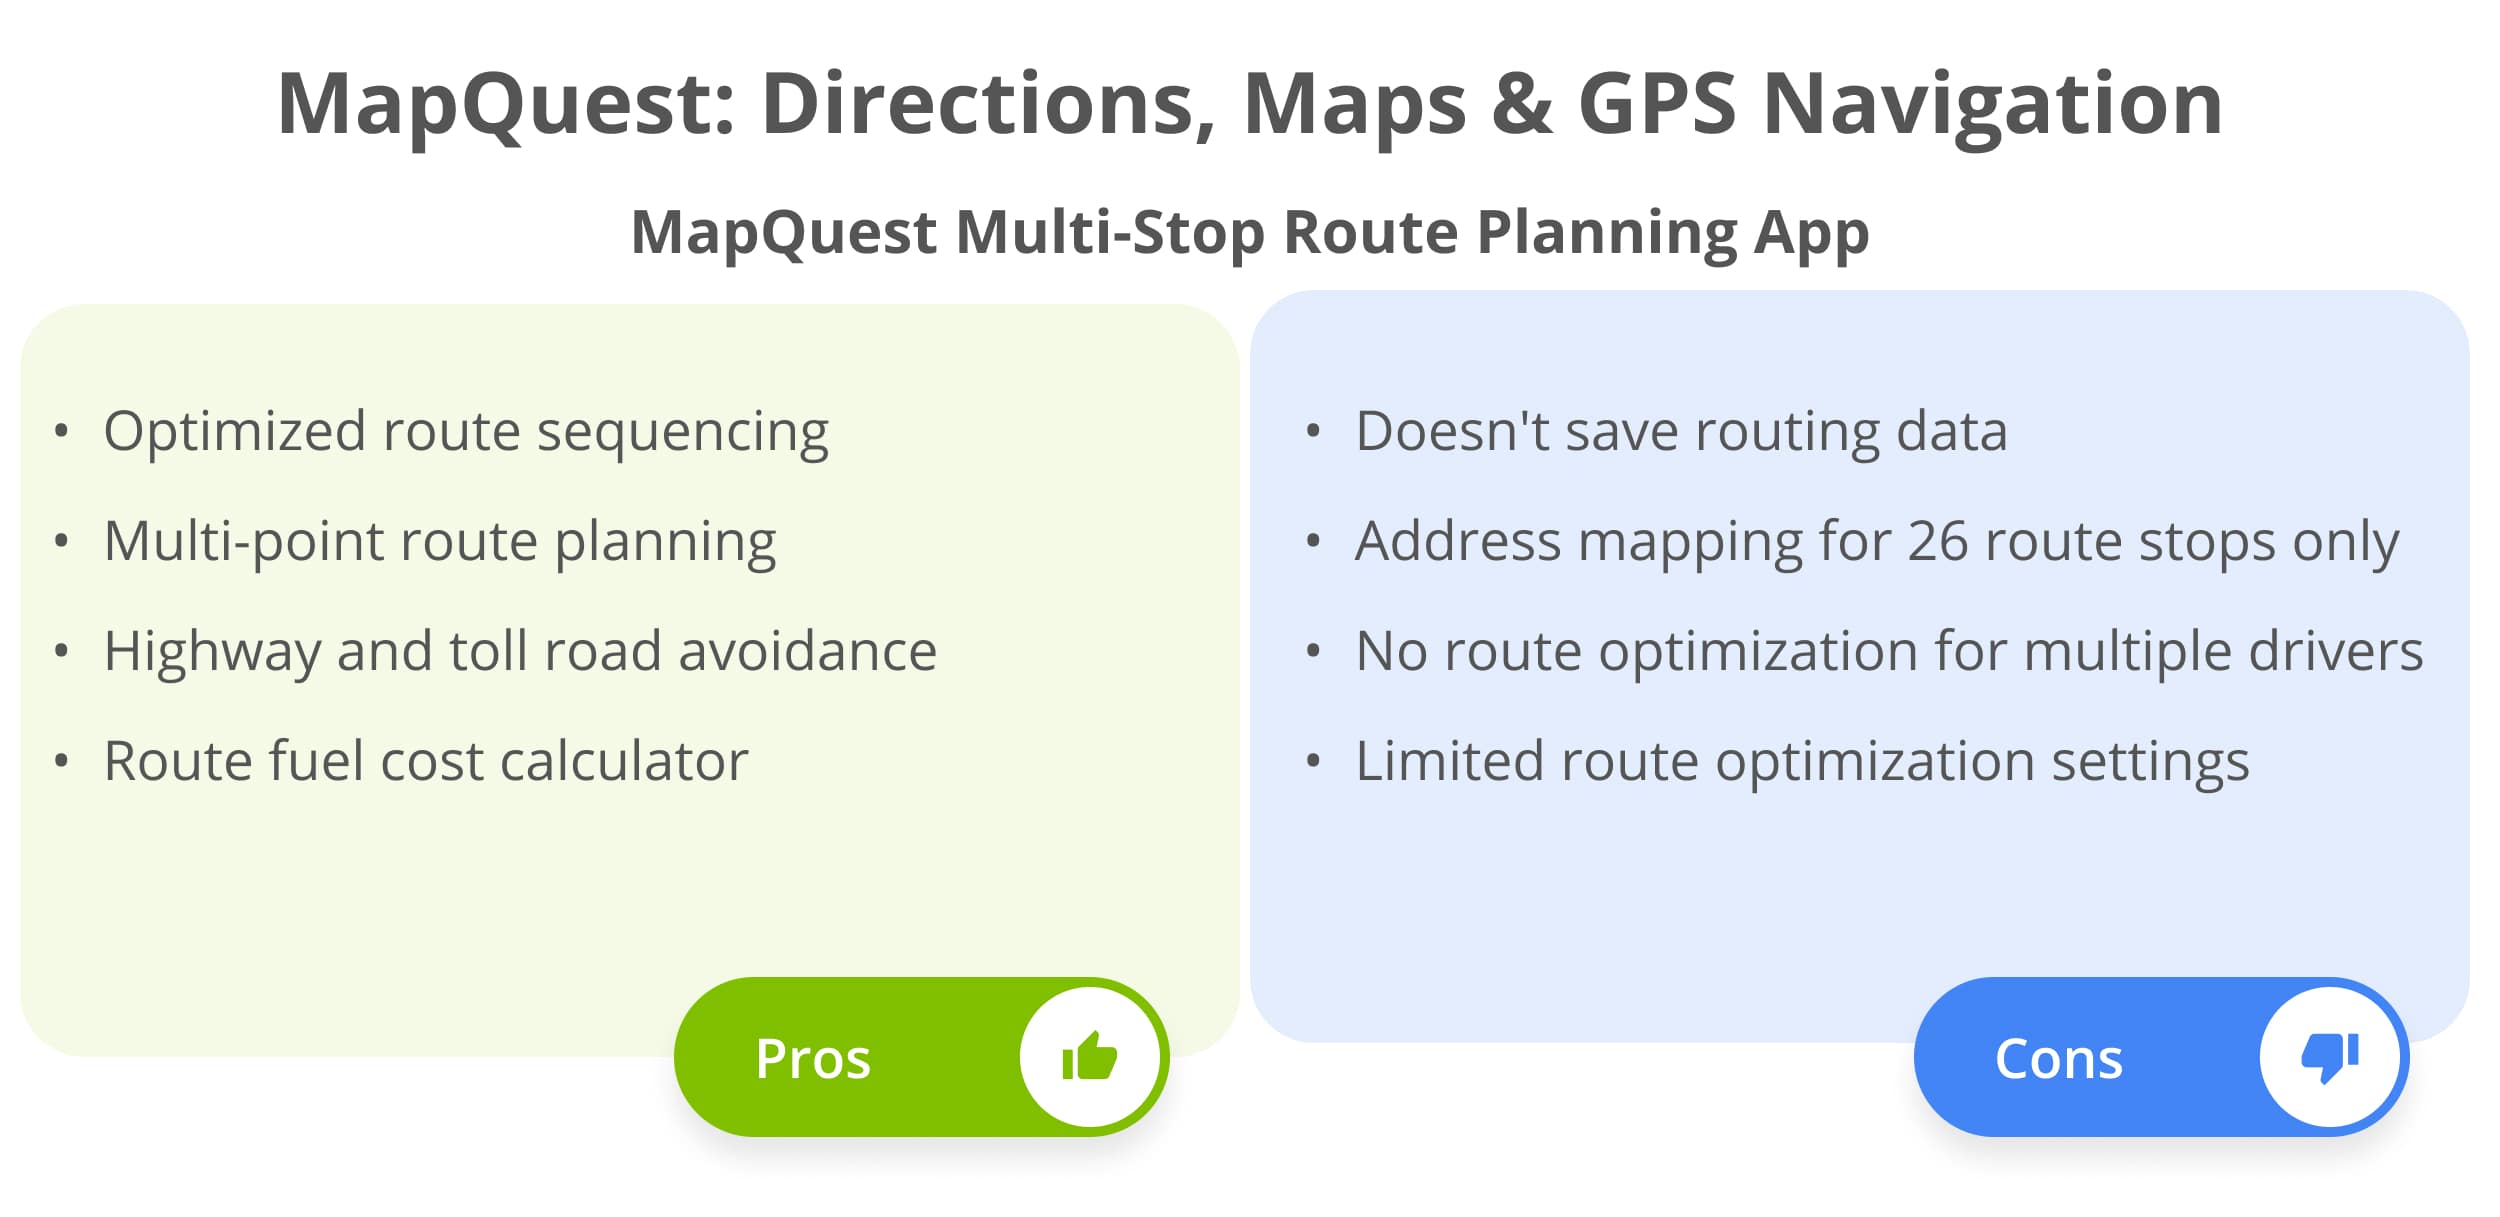 The pros and cons of using the MapQuest route planner app to optimize multi stop routes.